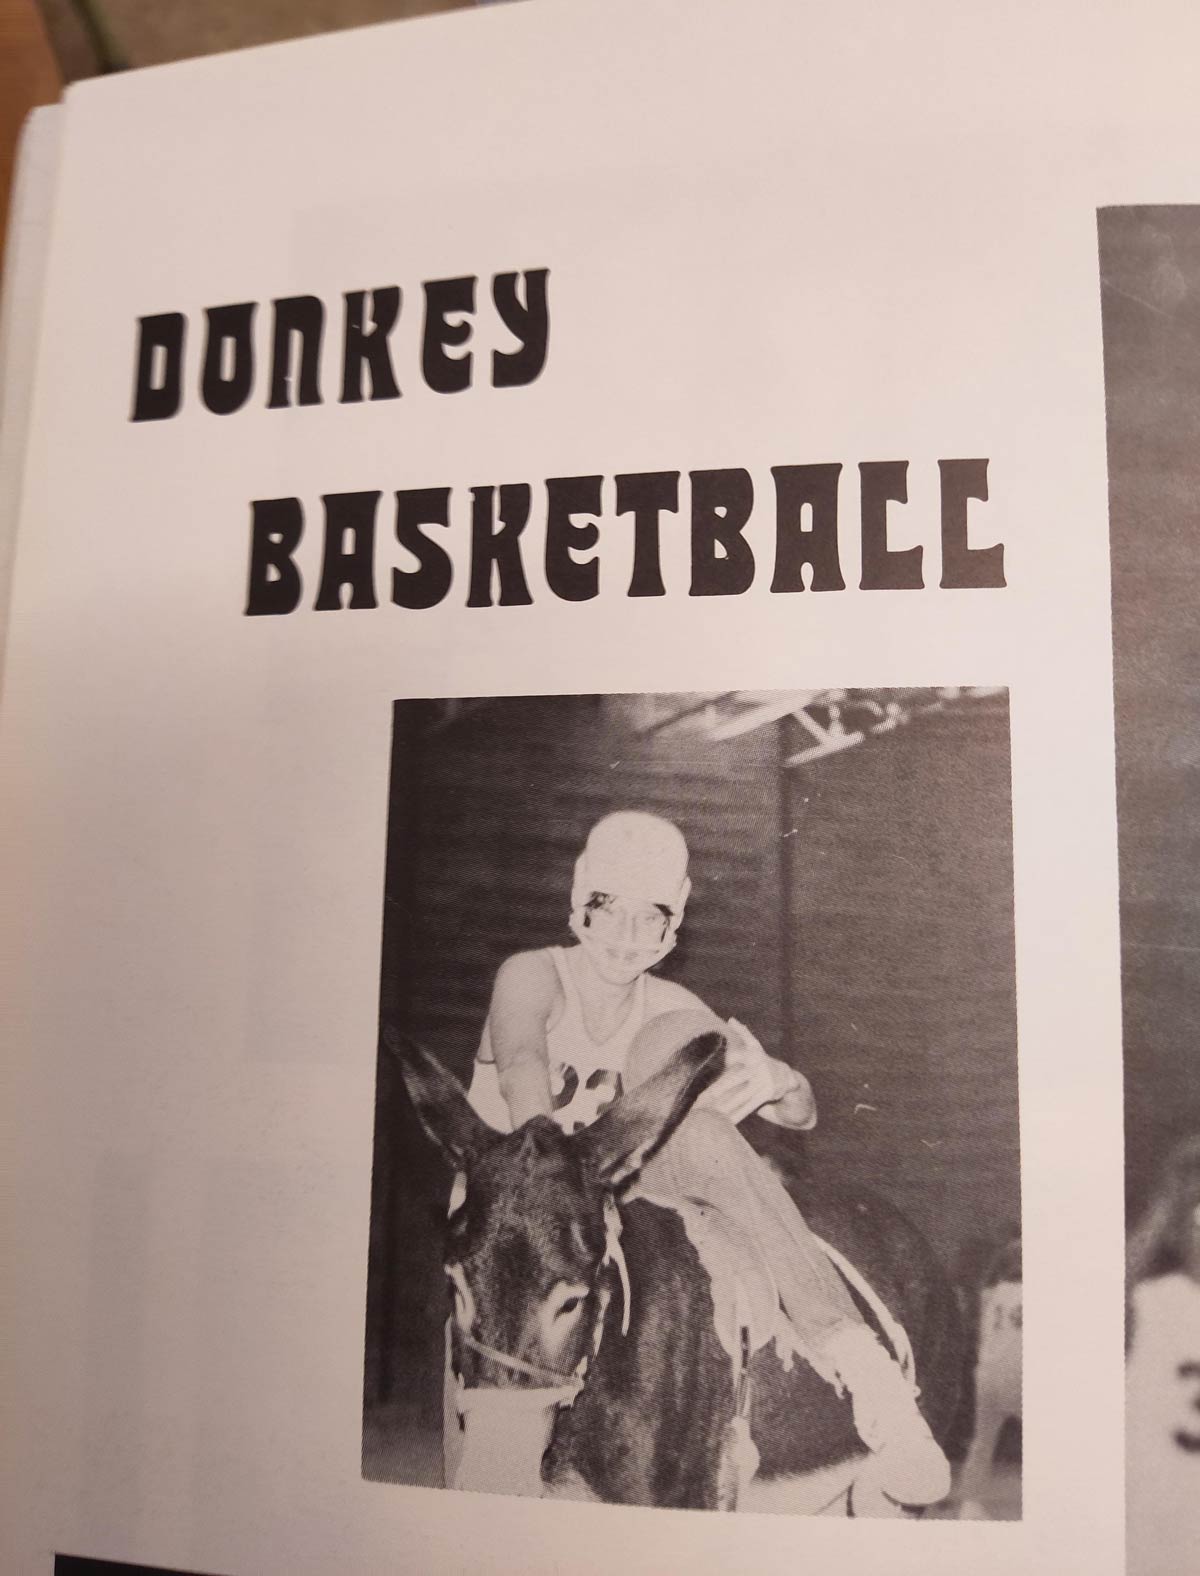 Of course this was a sport at my high school in the 70s